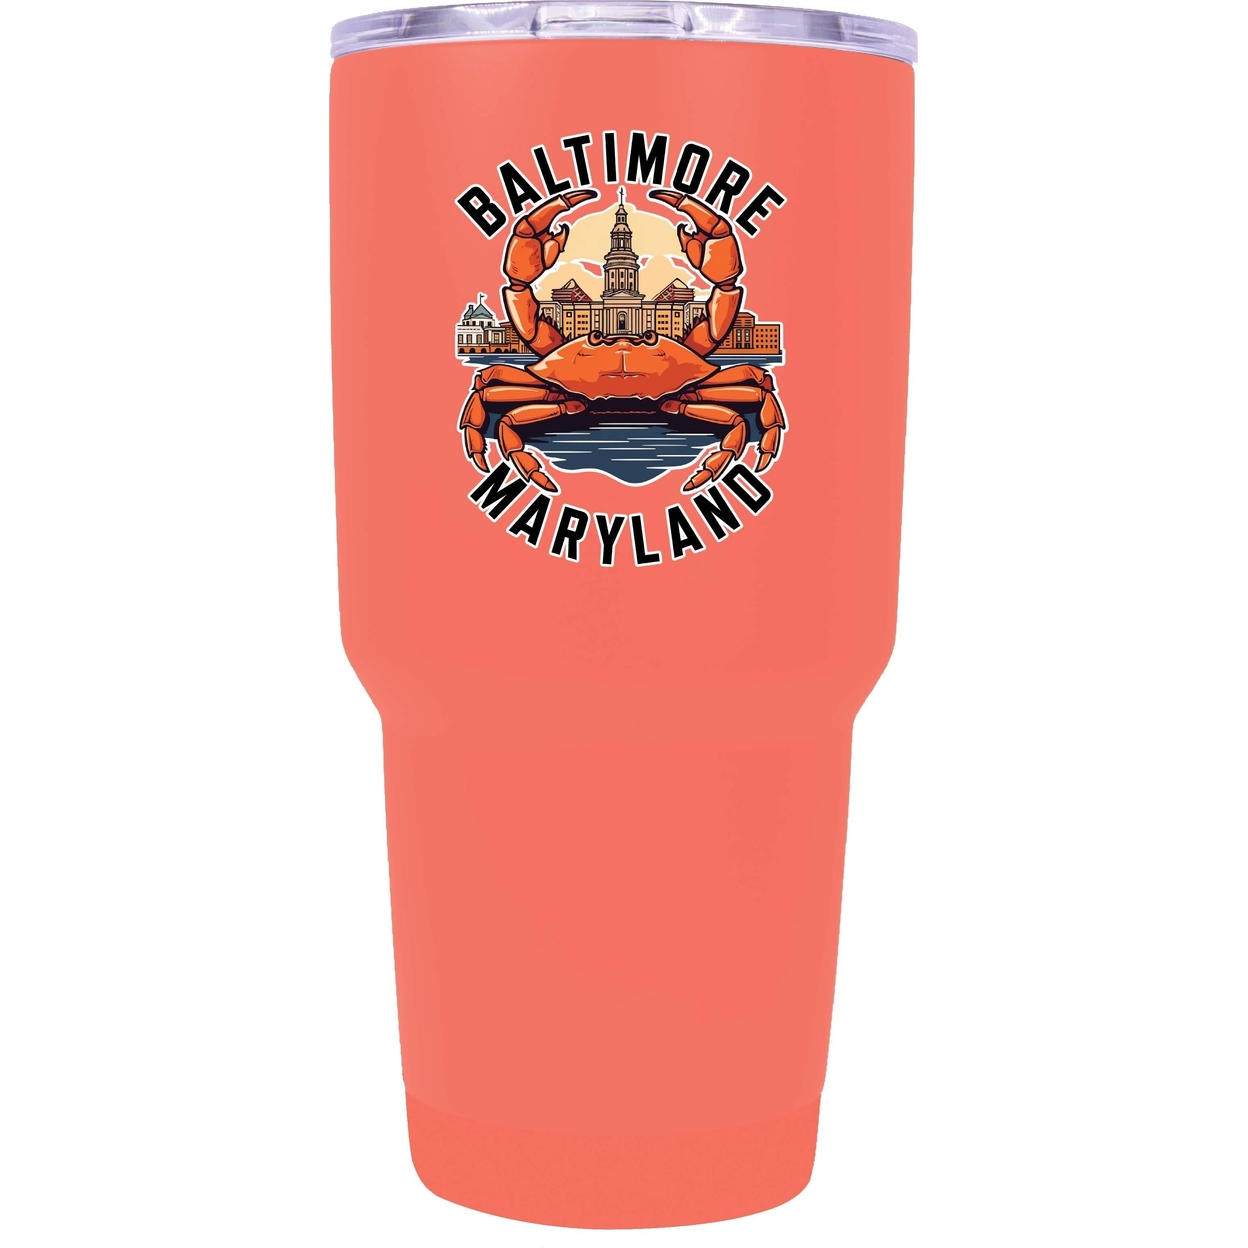 Baltimore Maryland D Souvenir 24 Oz Insulated Tumbler - Coral,,4-Pack